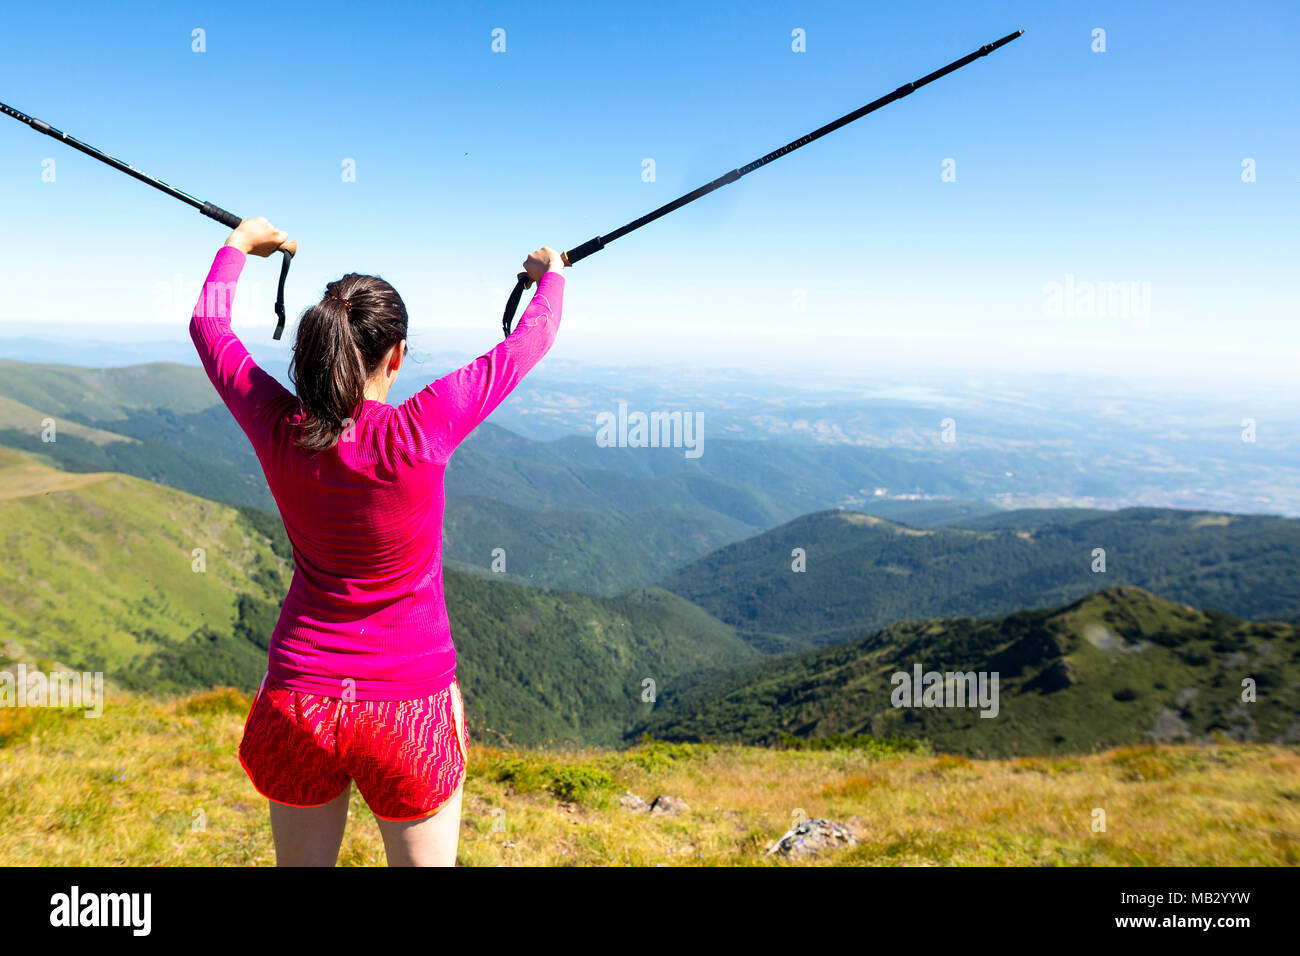 Young woman in pink trekking in the mountain. Enjoying the freedom nature gives. Sunny warm summer day. Holding walking canes in the air. From her bac Stock Photo